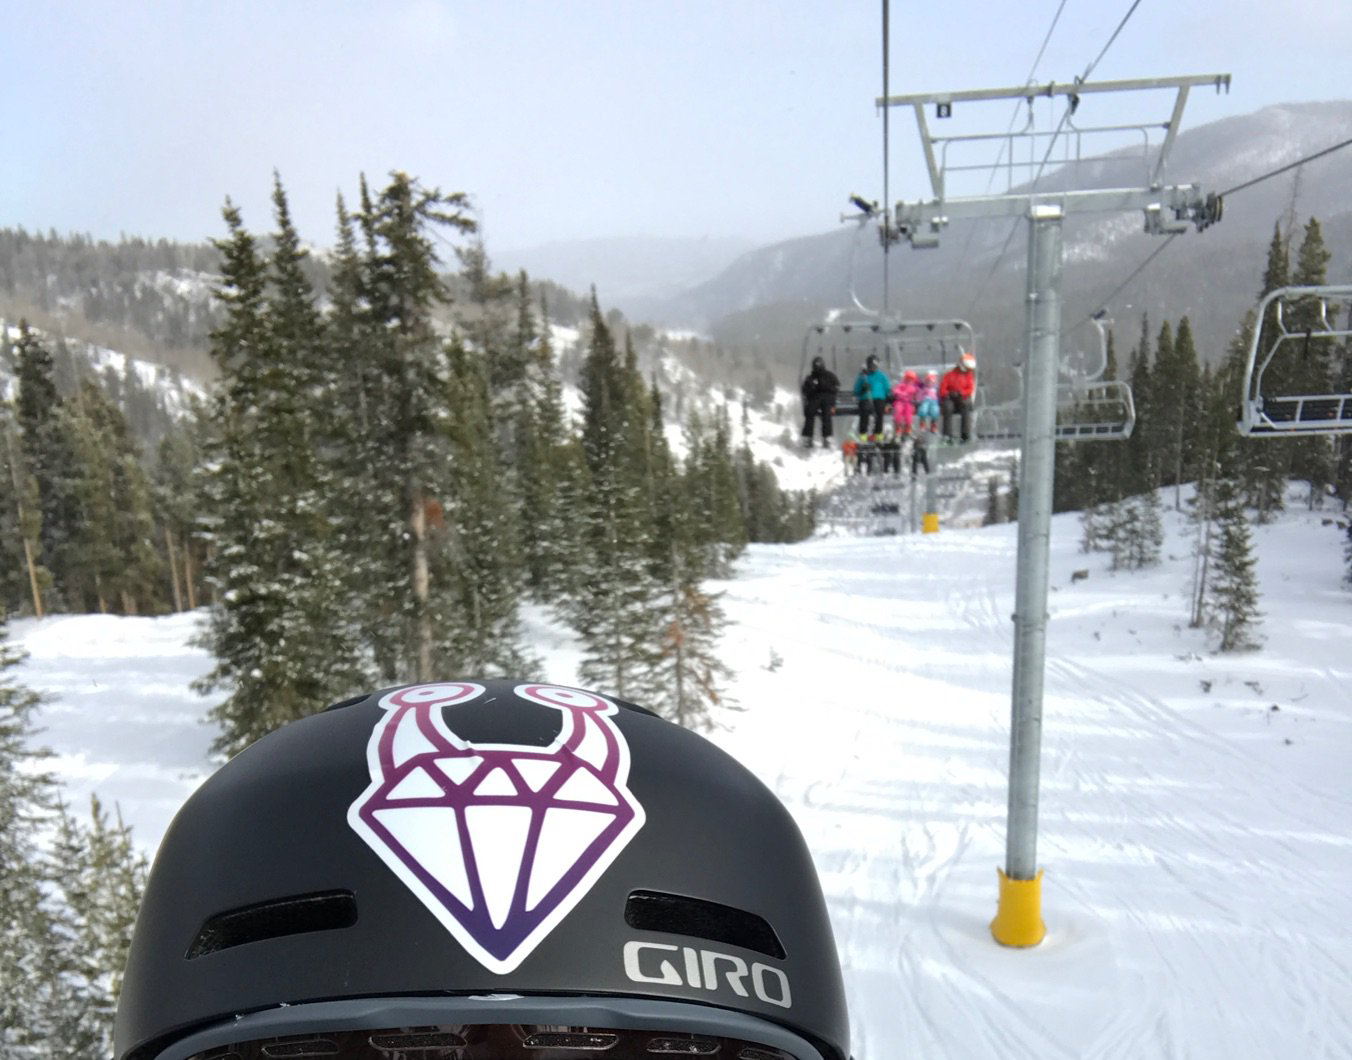 A Keep Ruby Weird sticker on a helmet in a snowy and woody area with a ski lift seat with five people behind